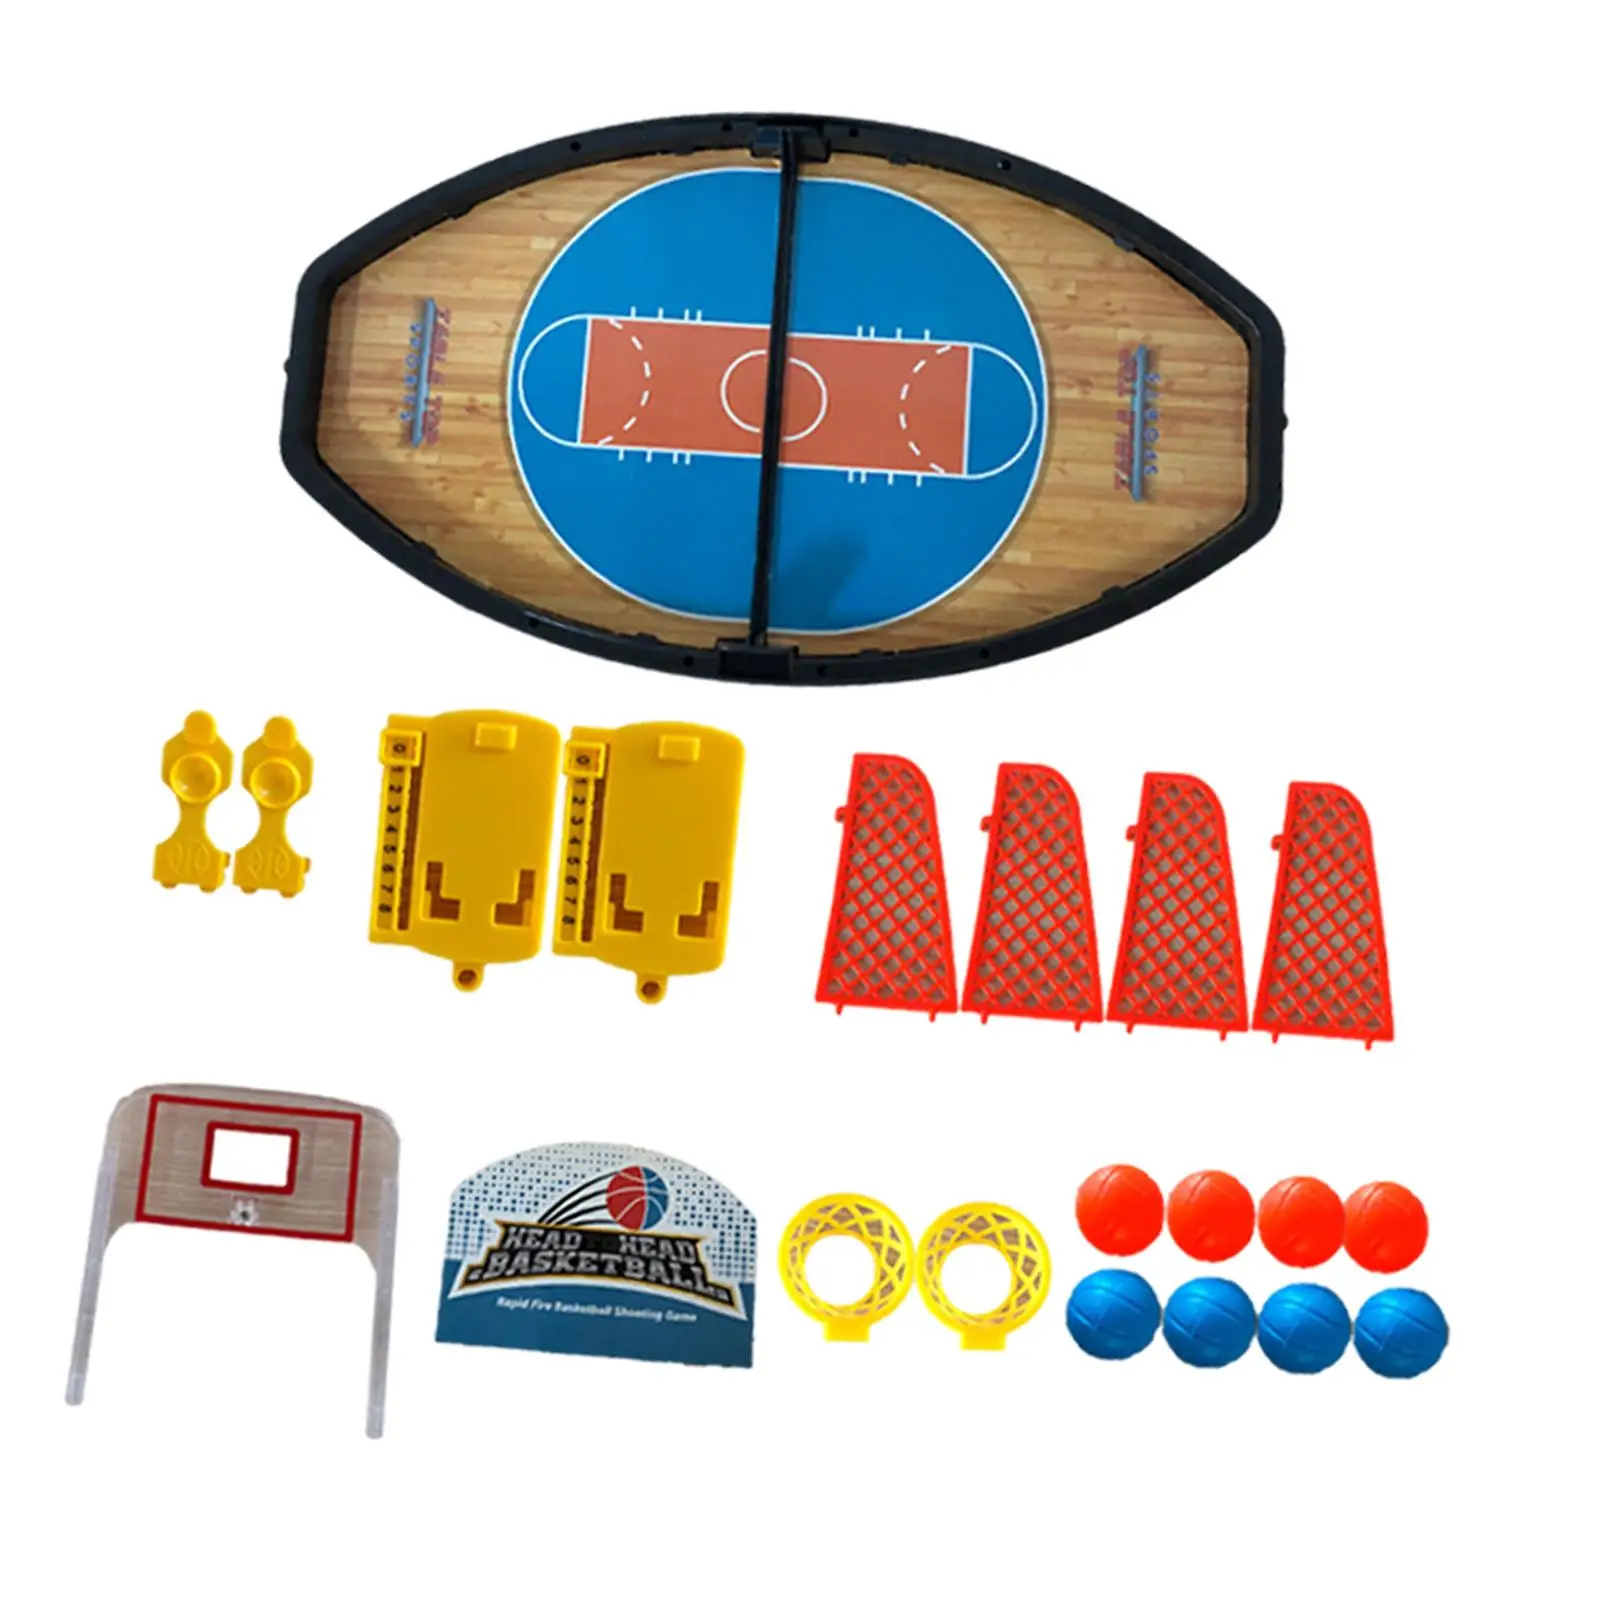 Desktop Basketball Game Creative Party Table Game Interactive Sport Game for Kids Adults Kids Toy Mini Finger Bounce Basketball